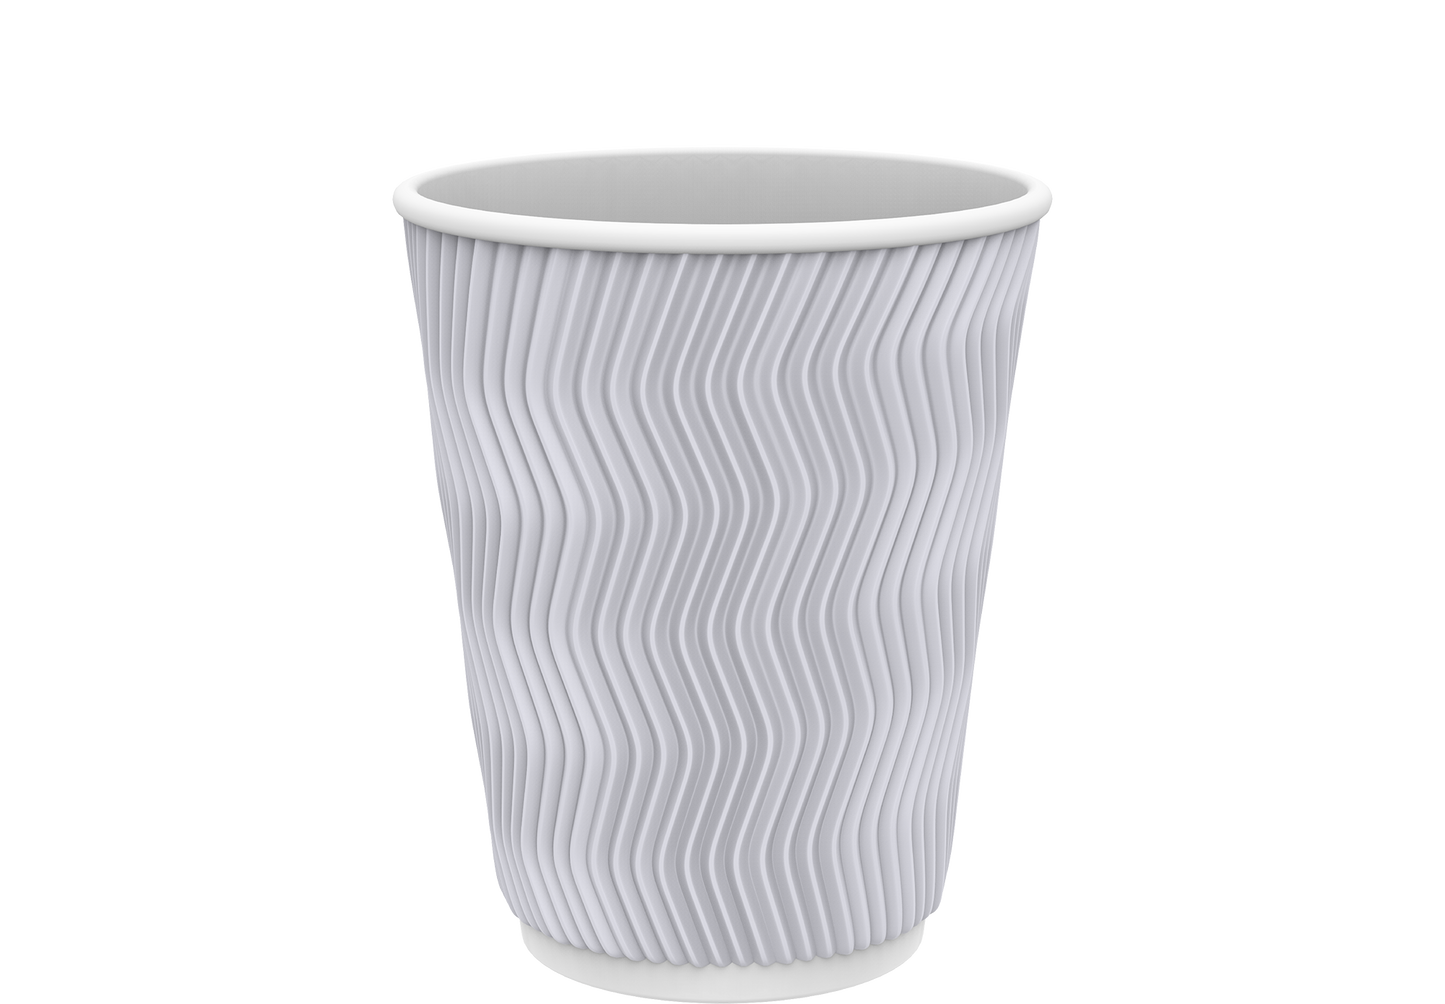 12 oz White Rippled Paper Coffee Cups Pack of 50